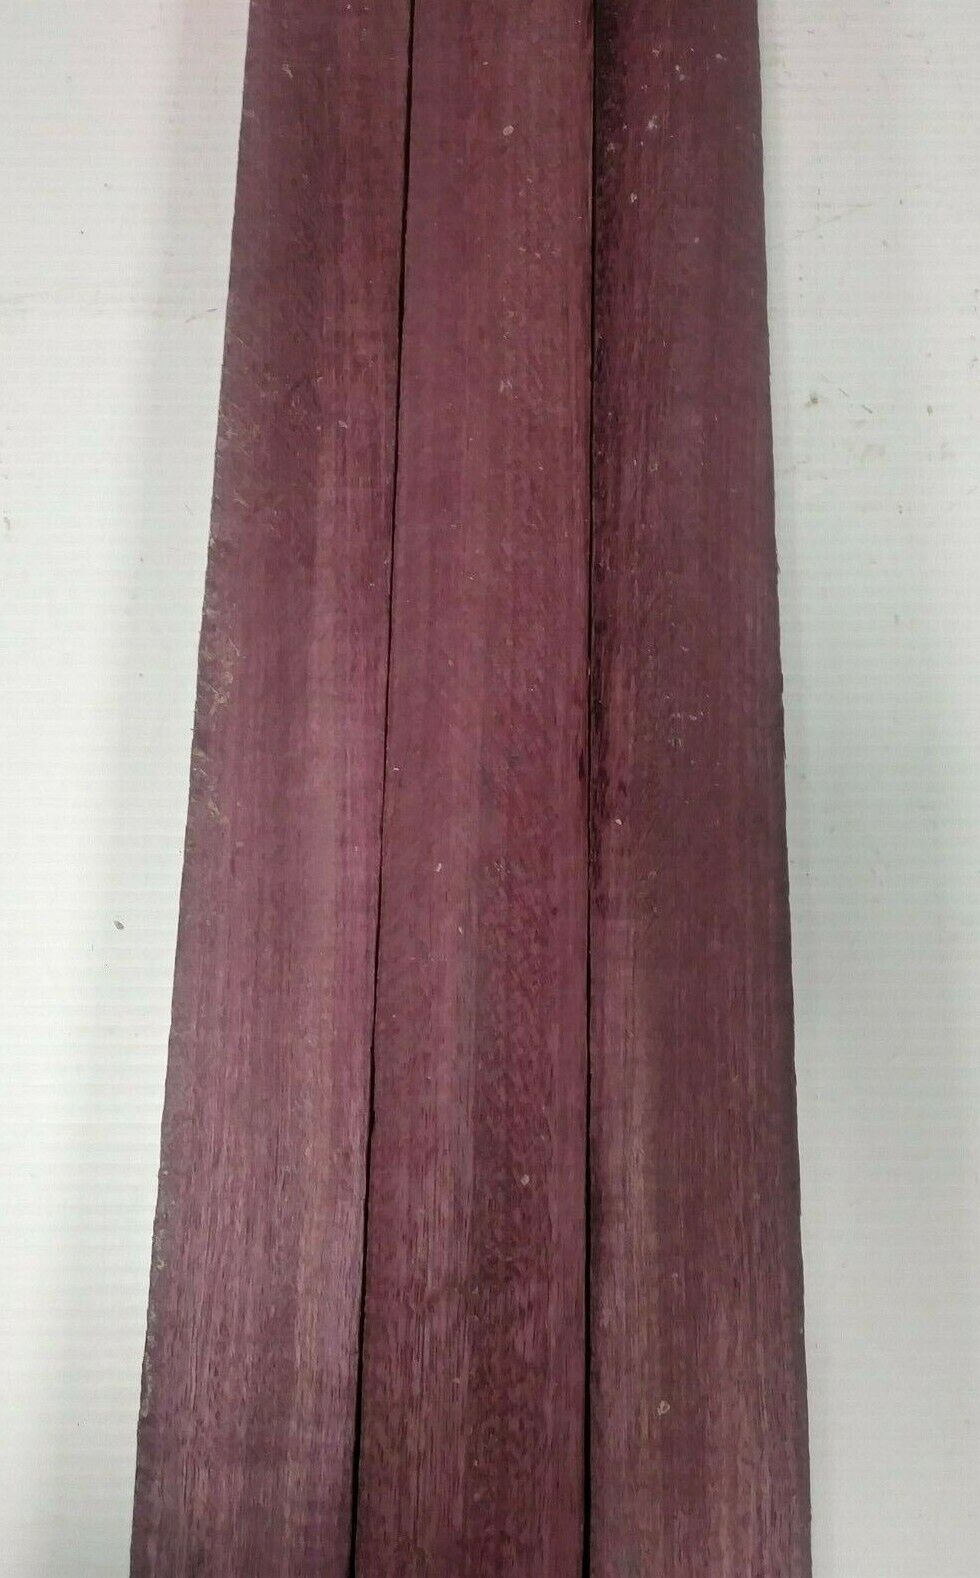 LOT OF 3 PIECES PURPLEHEART THIN STOCK BOARDS LUMBER CRAFTS WOOD 1/4" X 2" X 12" EXOTIC WOOD ZONE Does Not Apply